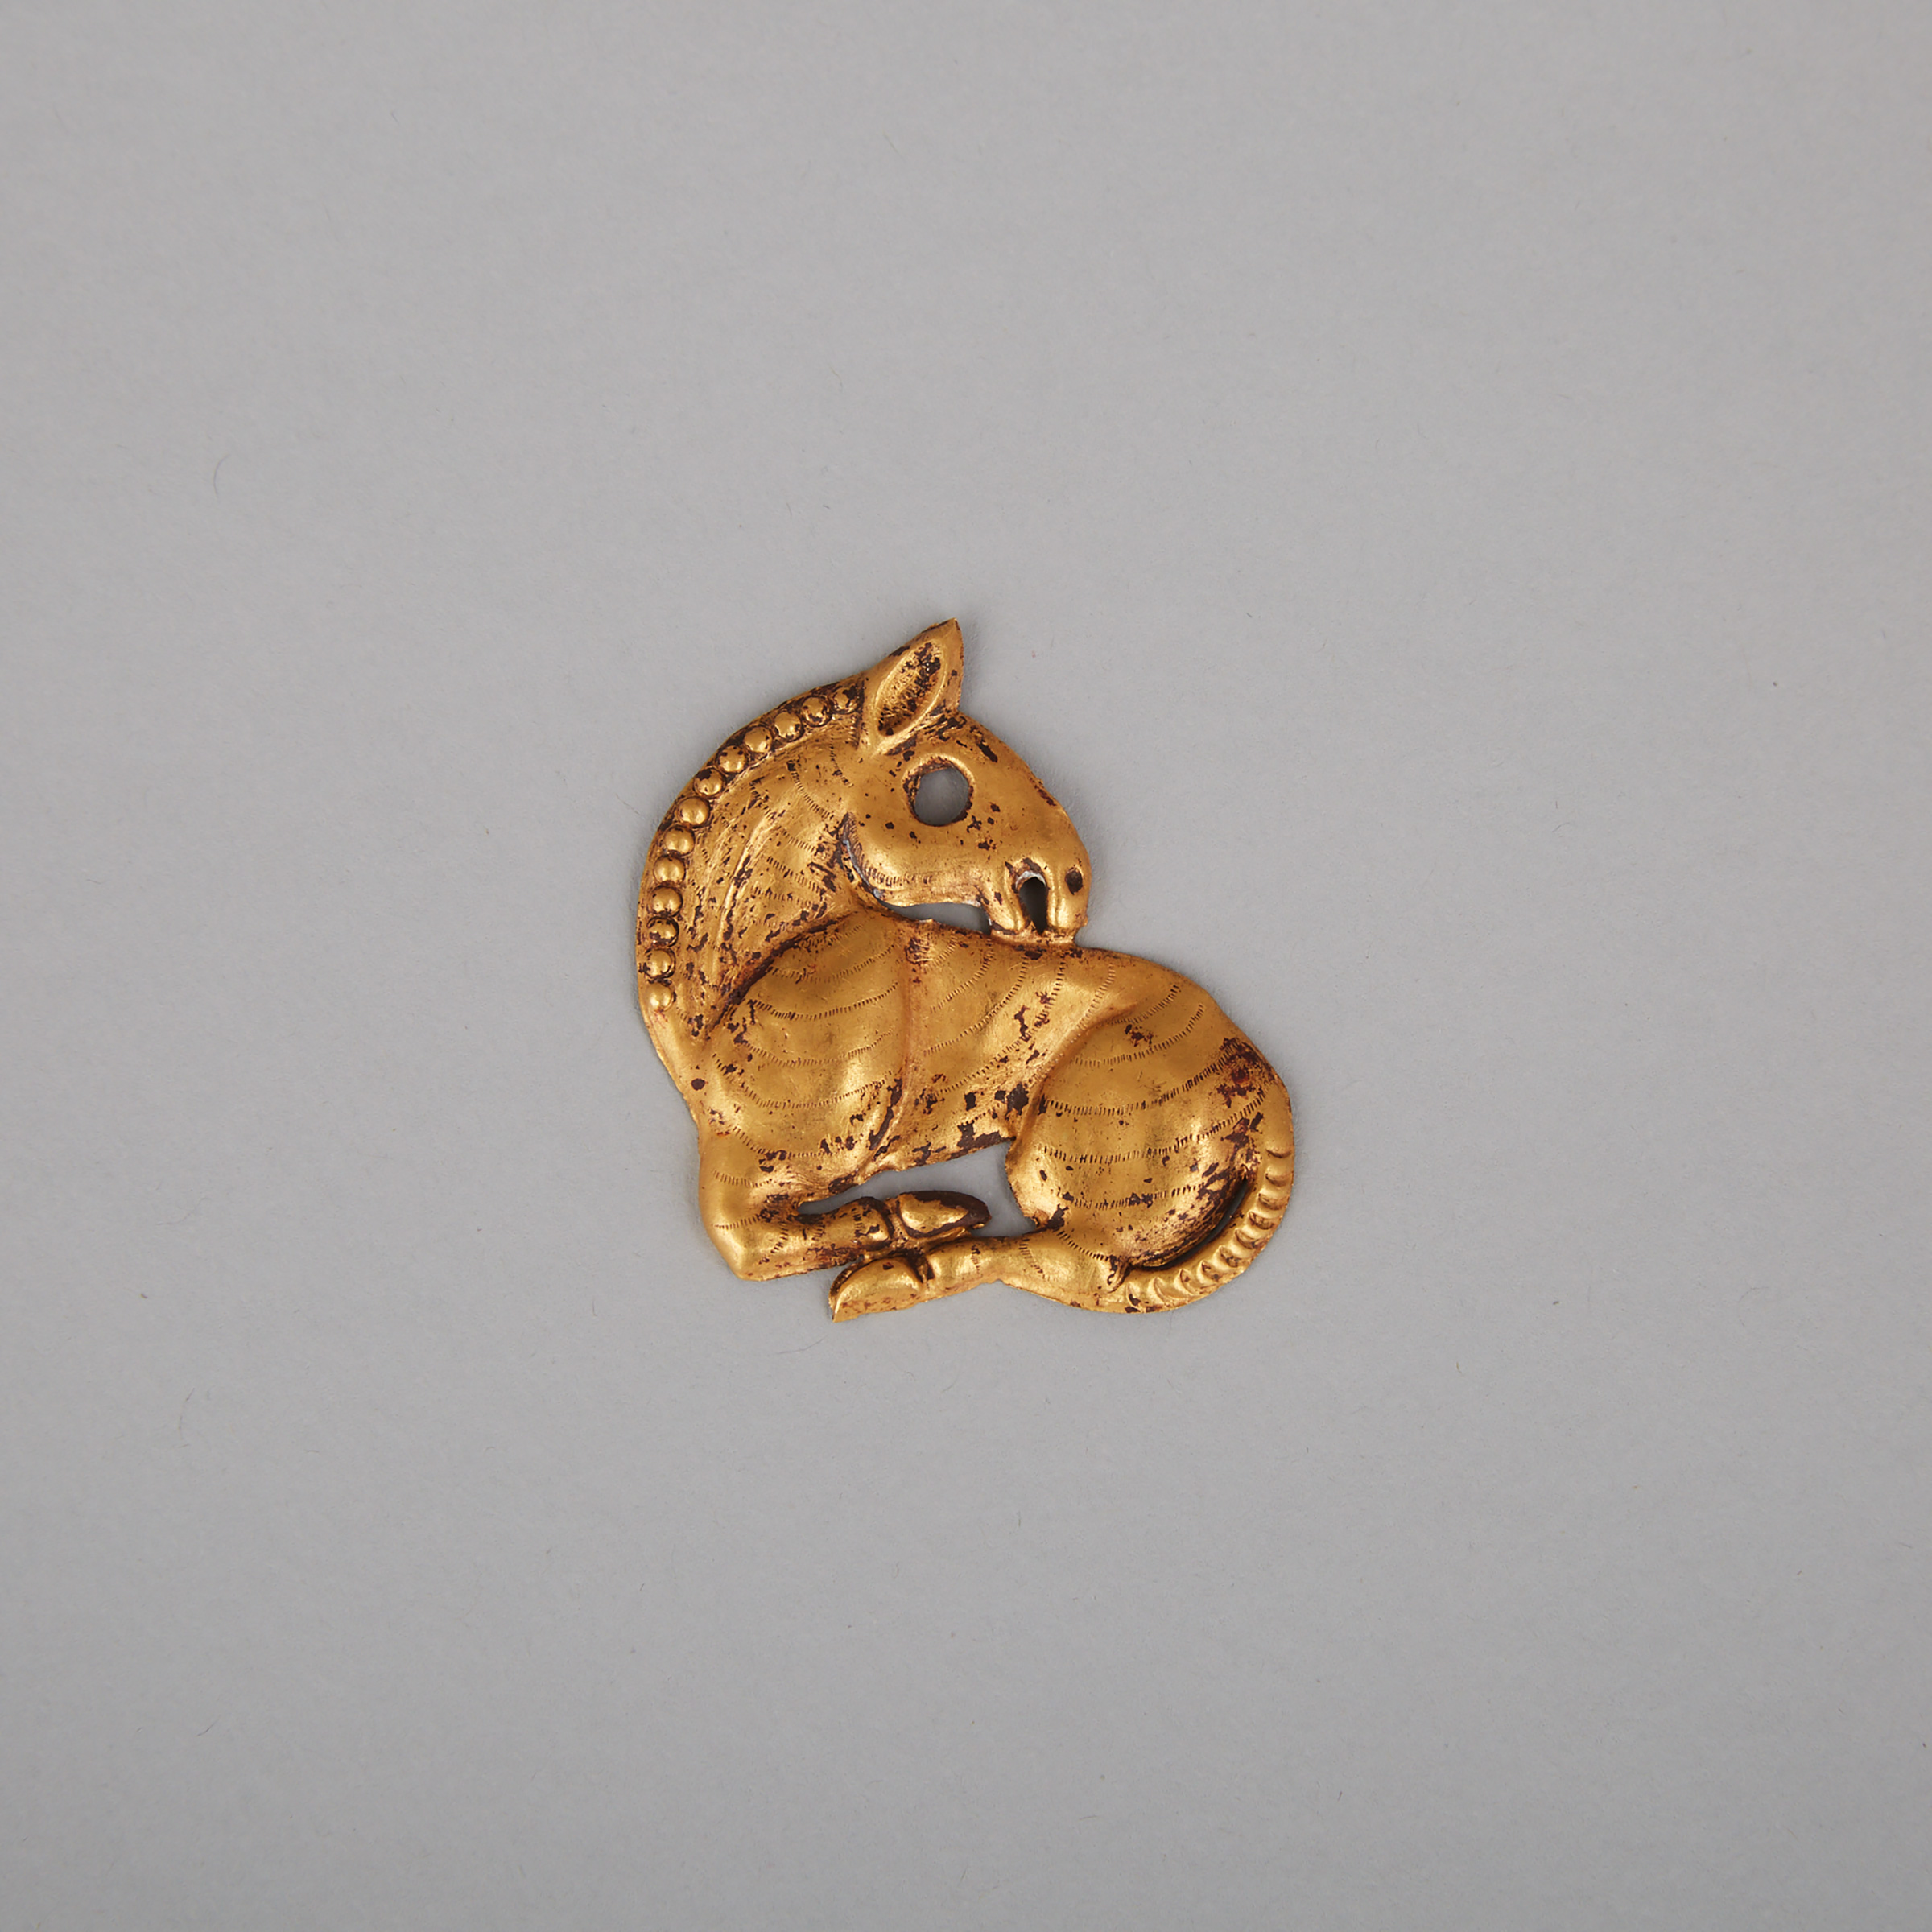 A Rare Solid Gold Horse Pendant Amulet, Ordos Region, Warring States Period, 5th to 3rd Century BC